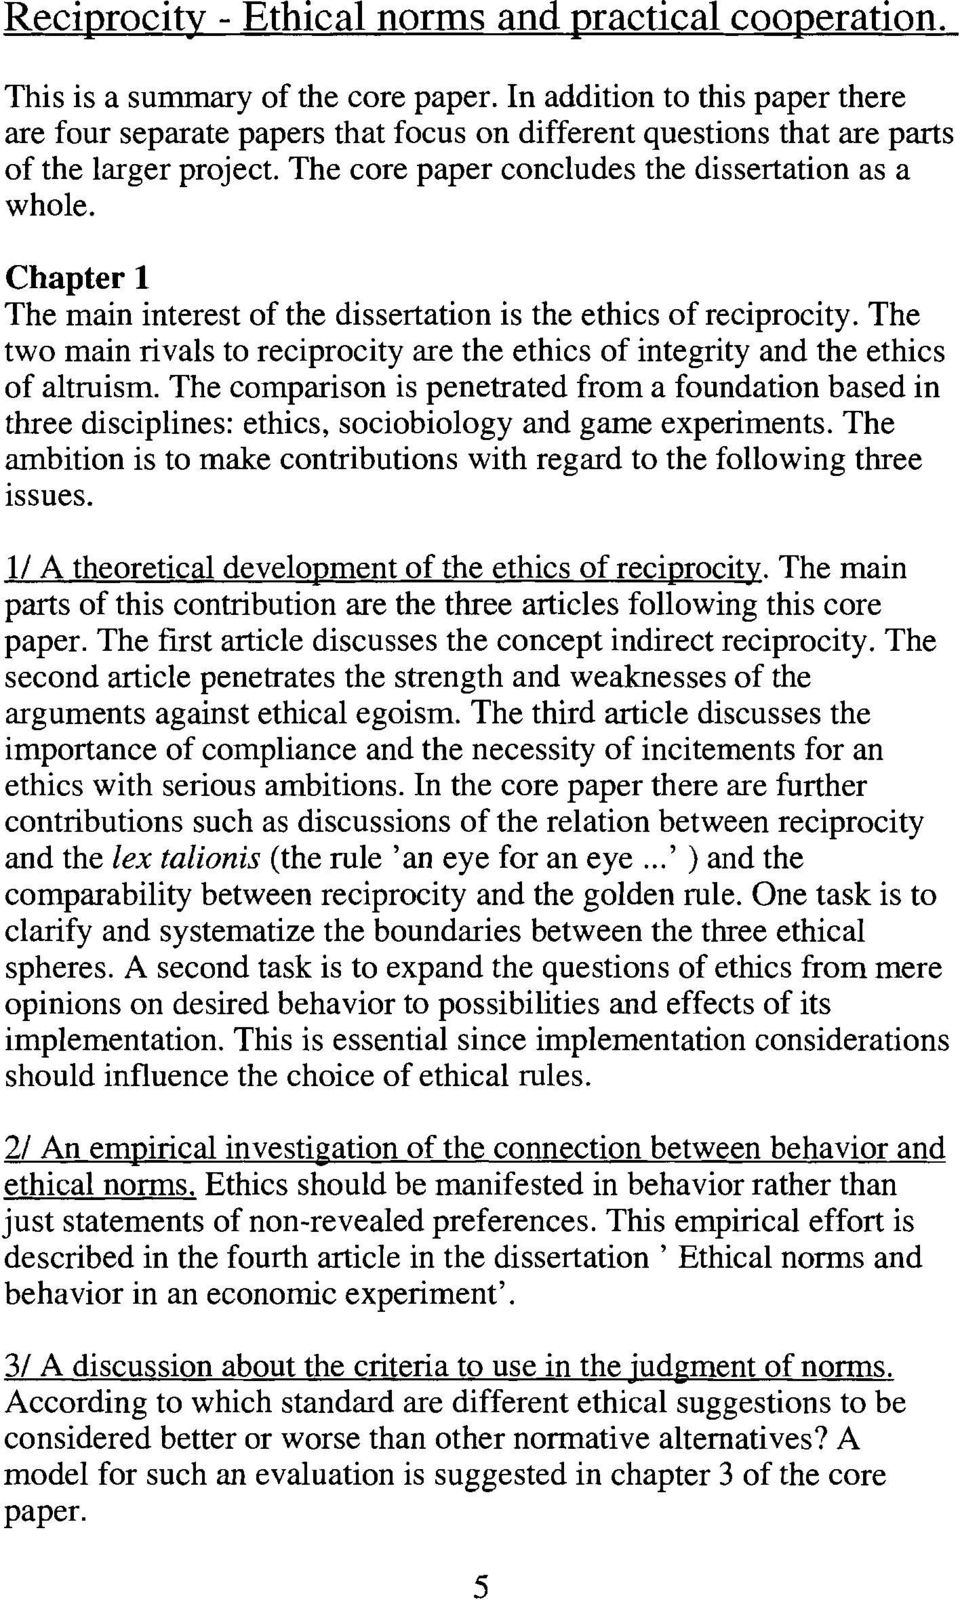 Chapter 1 The main interest of the dissertation is the ethics ofreciprocity. The two main rivals to reciprocity are the ethics of integrity and the ethics of altruism.